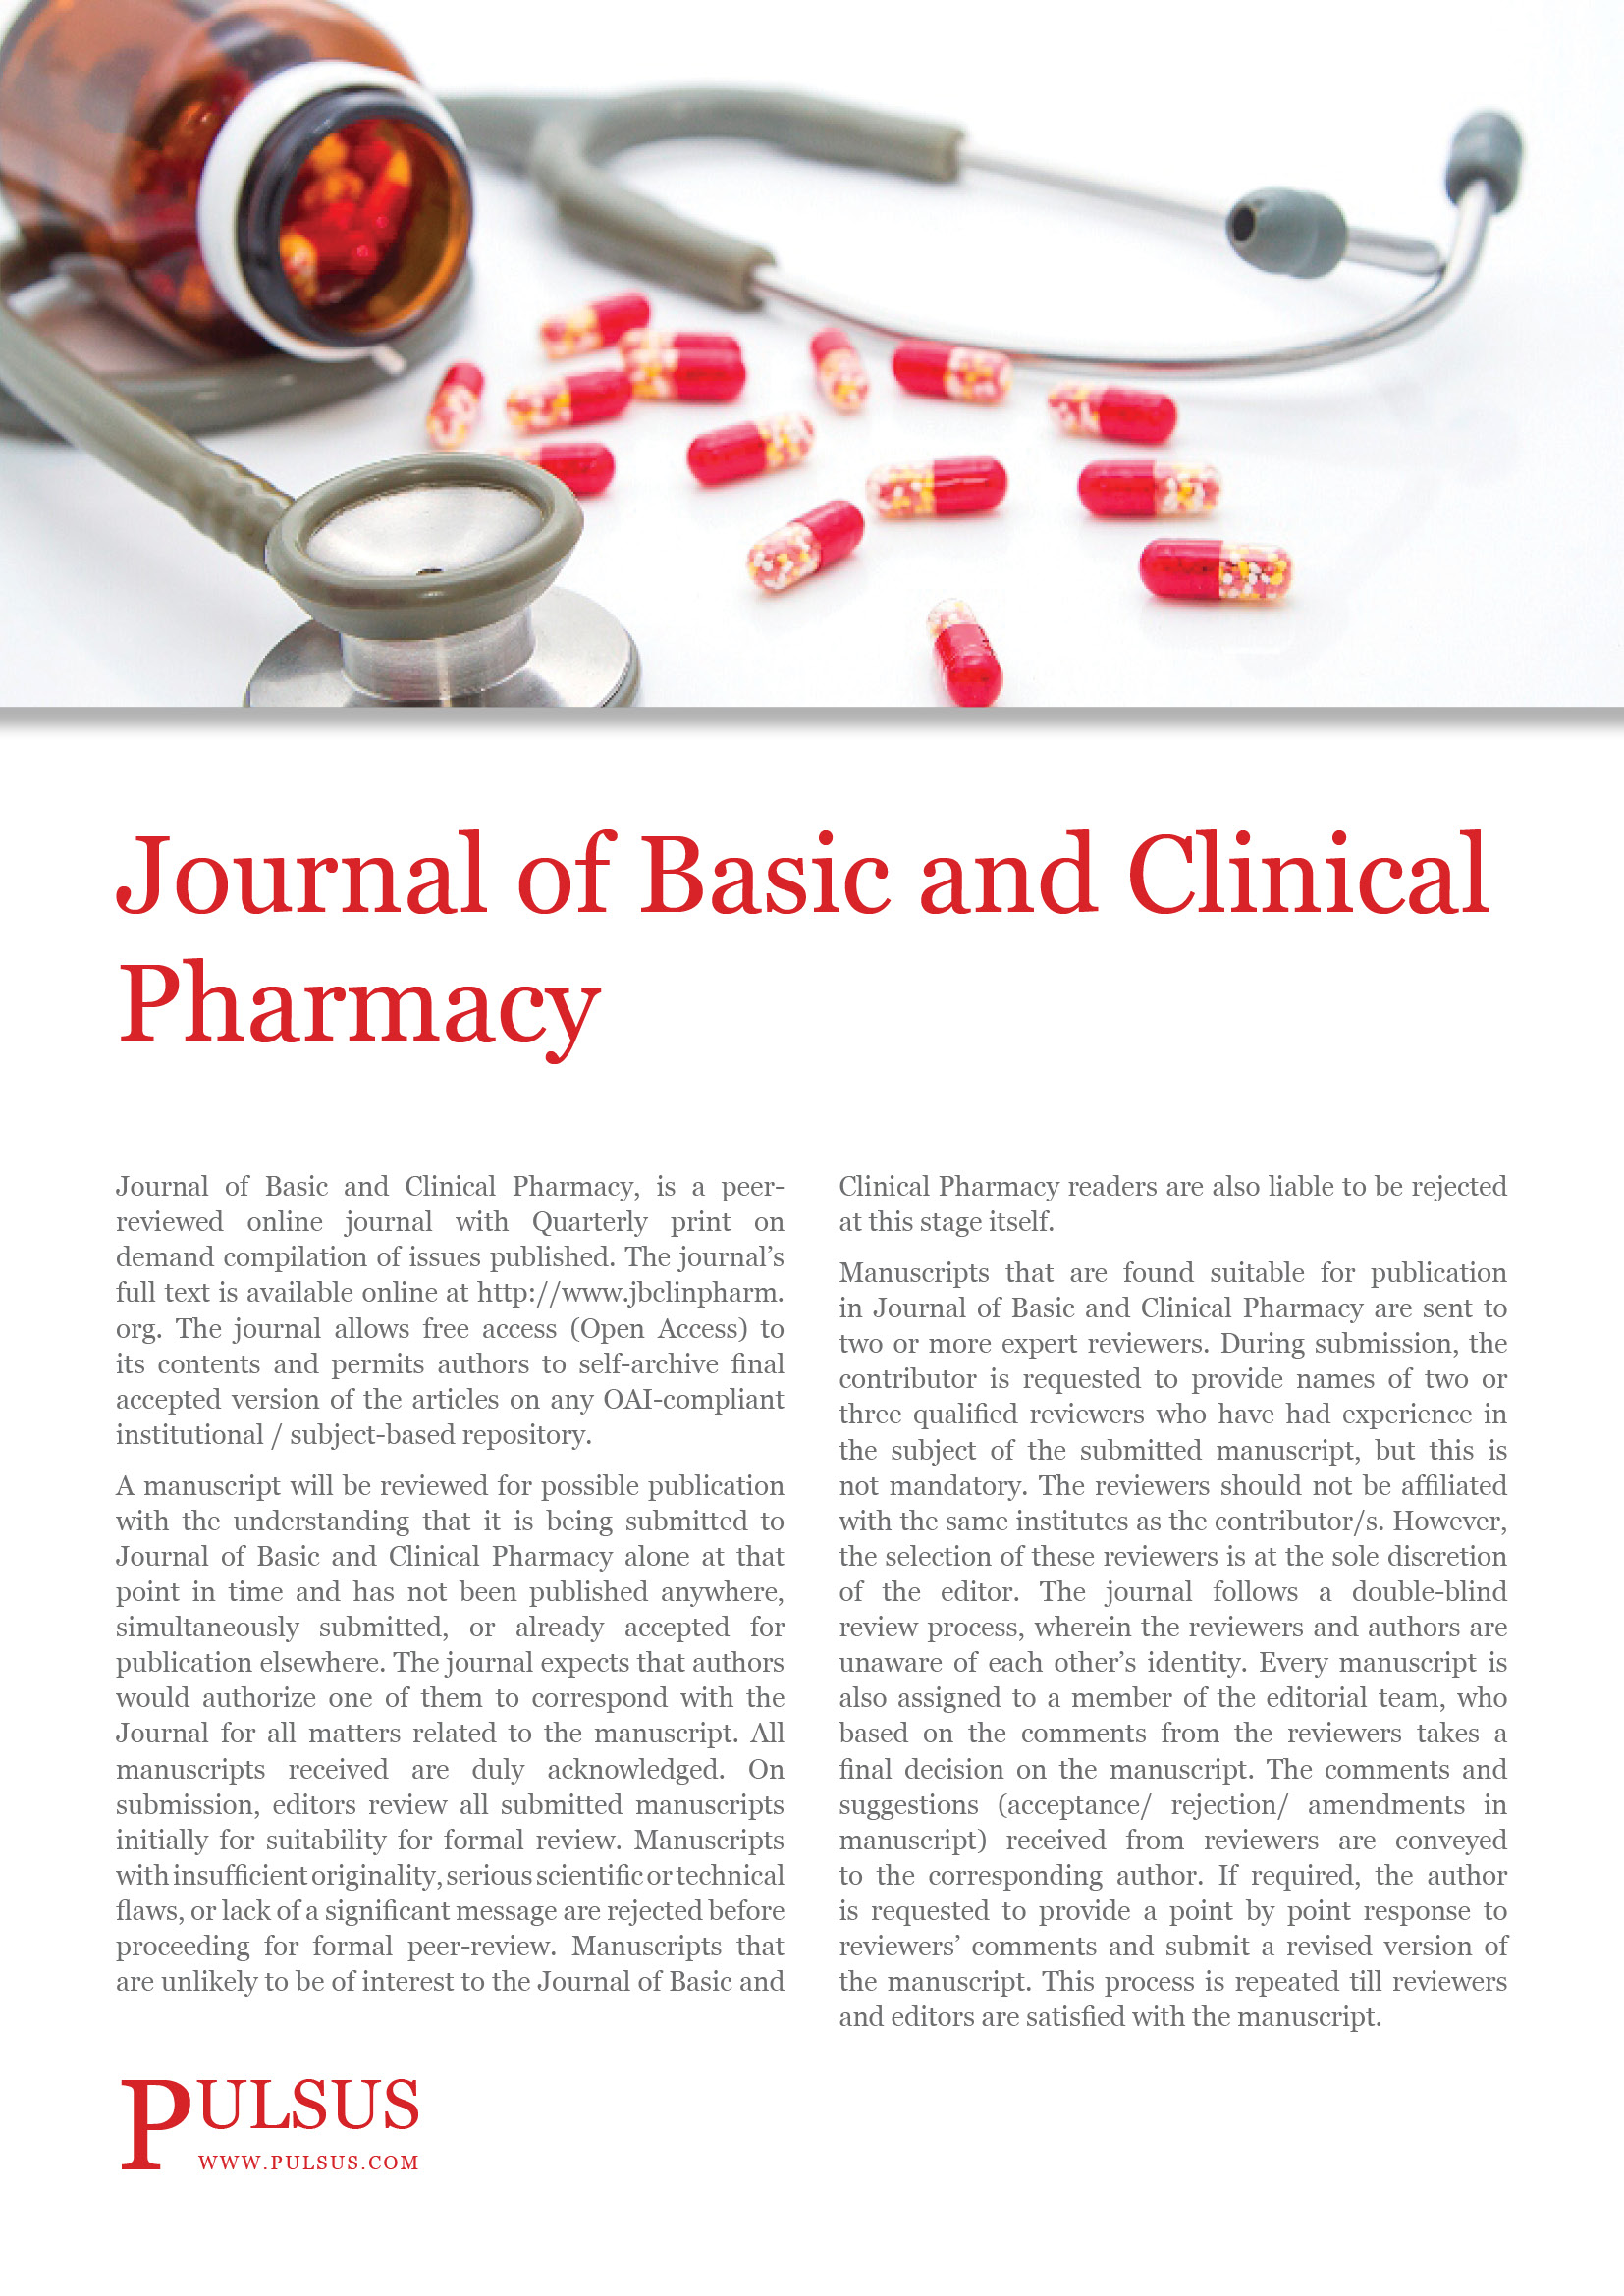 Journal of Basic and Clinical Pharmacy